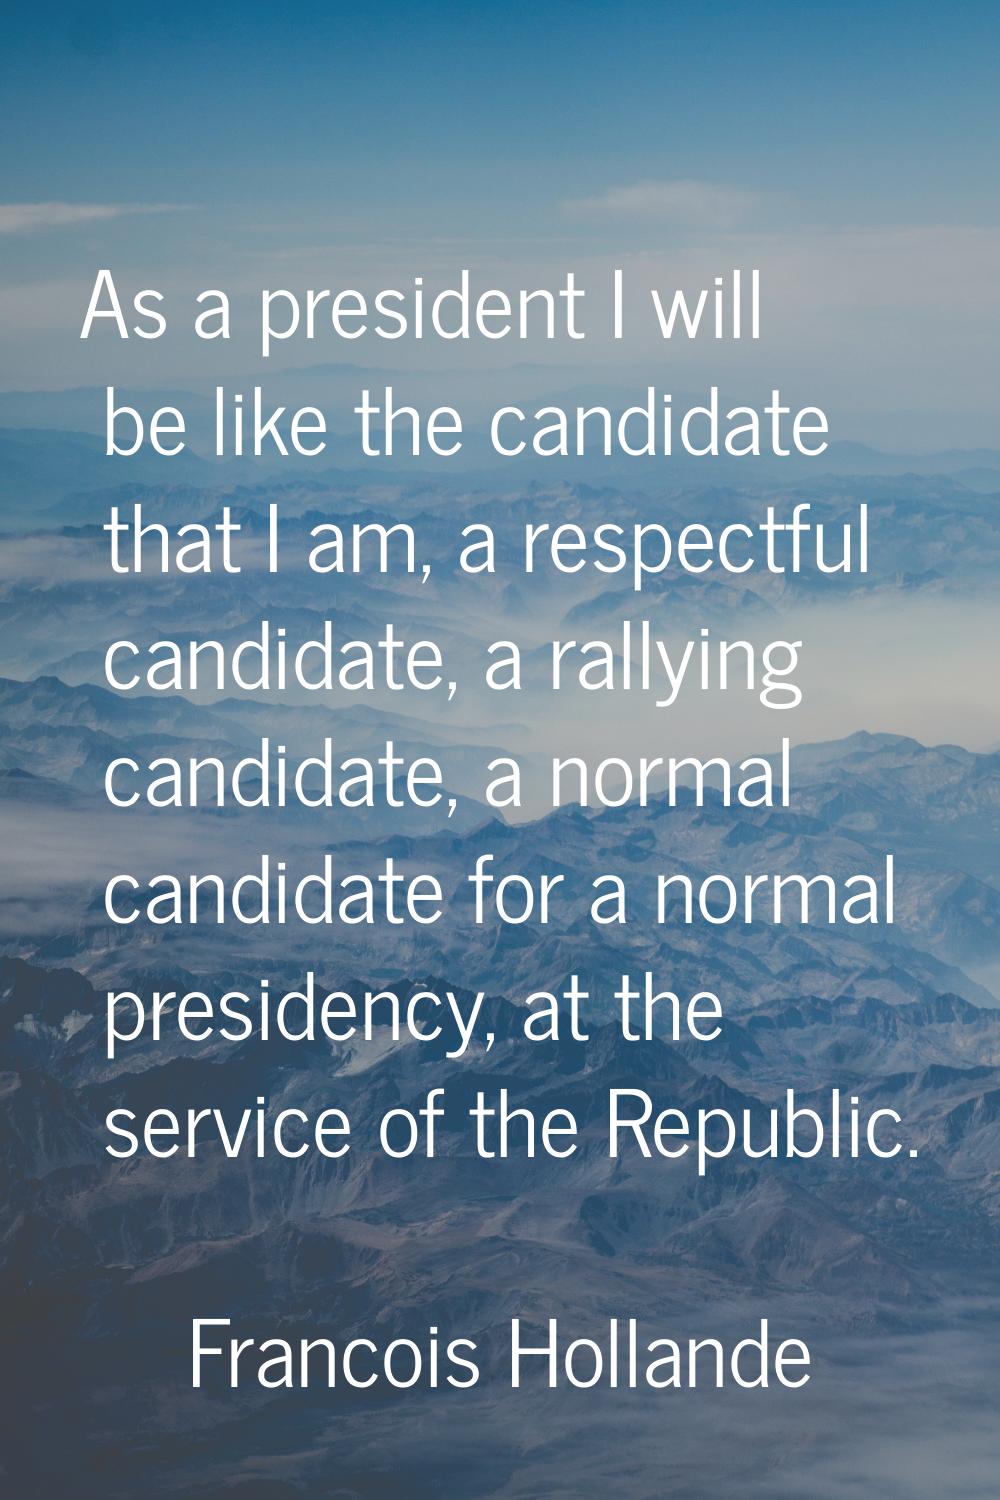 As a president I will be like the candidate that I am, a respectful candidate, a rallying candidate